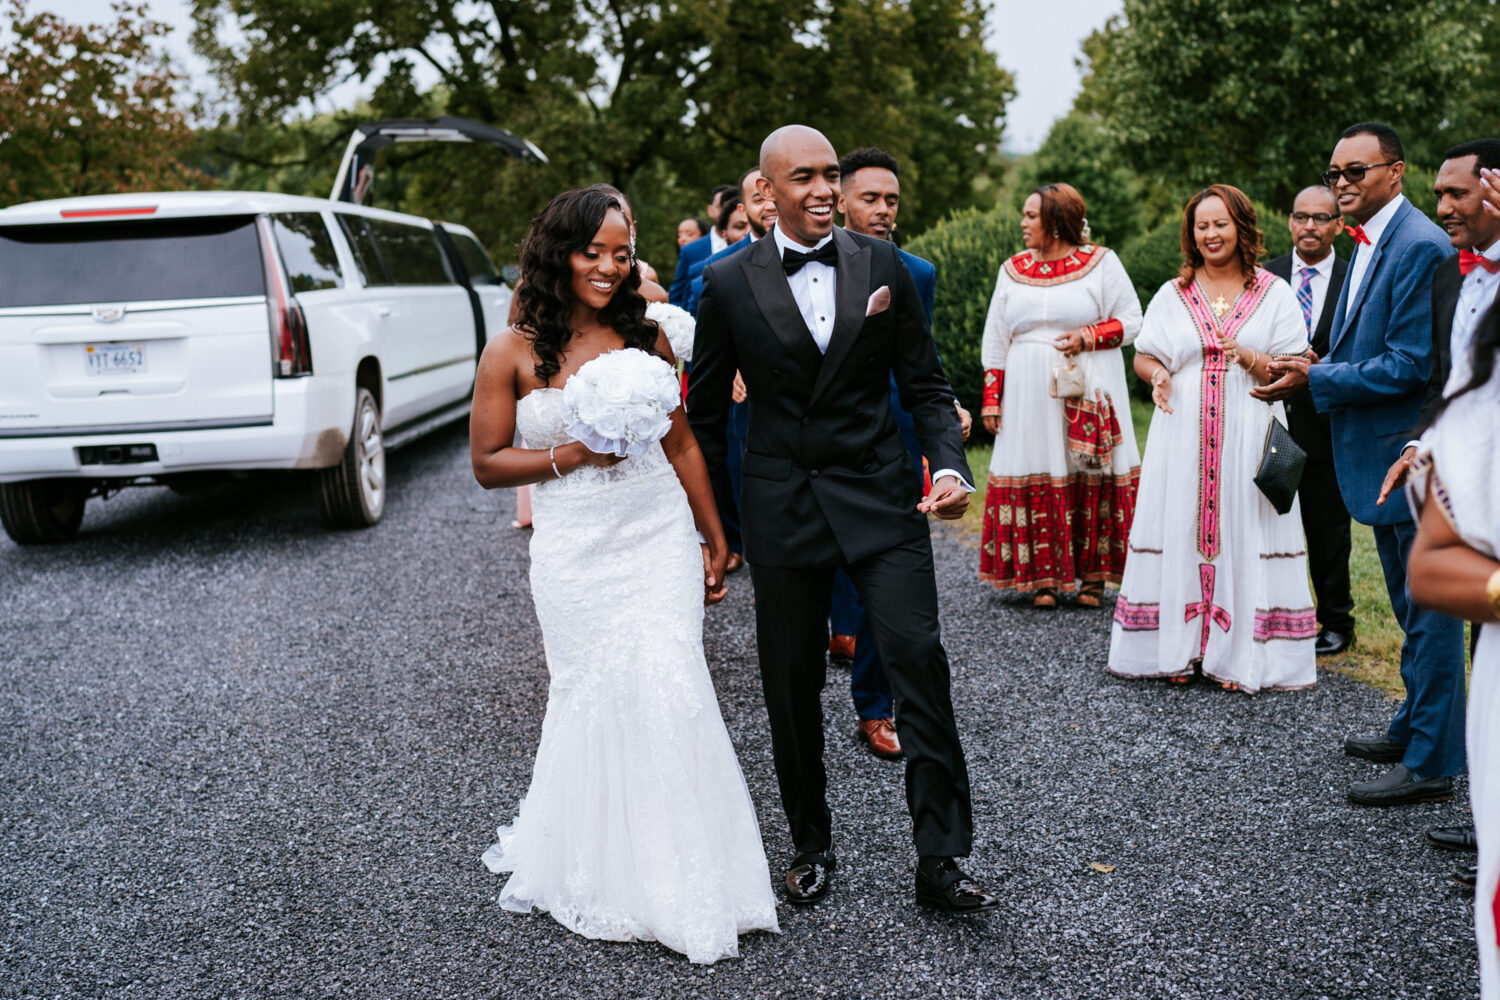 bride and groom walking together on their wedding day with family watching